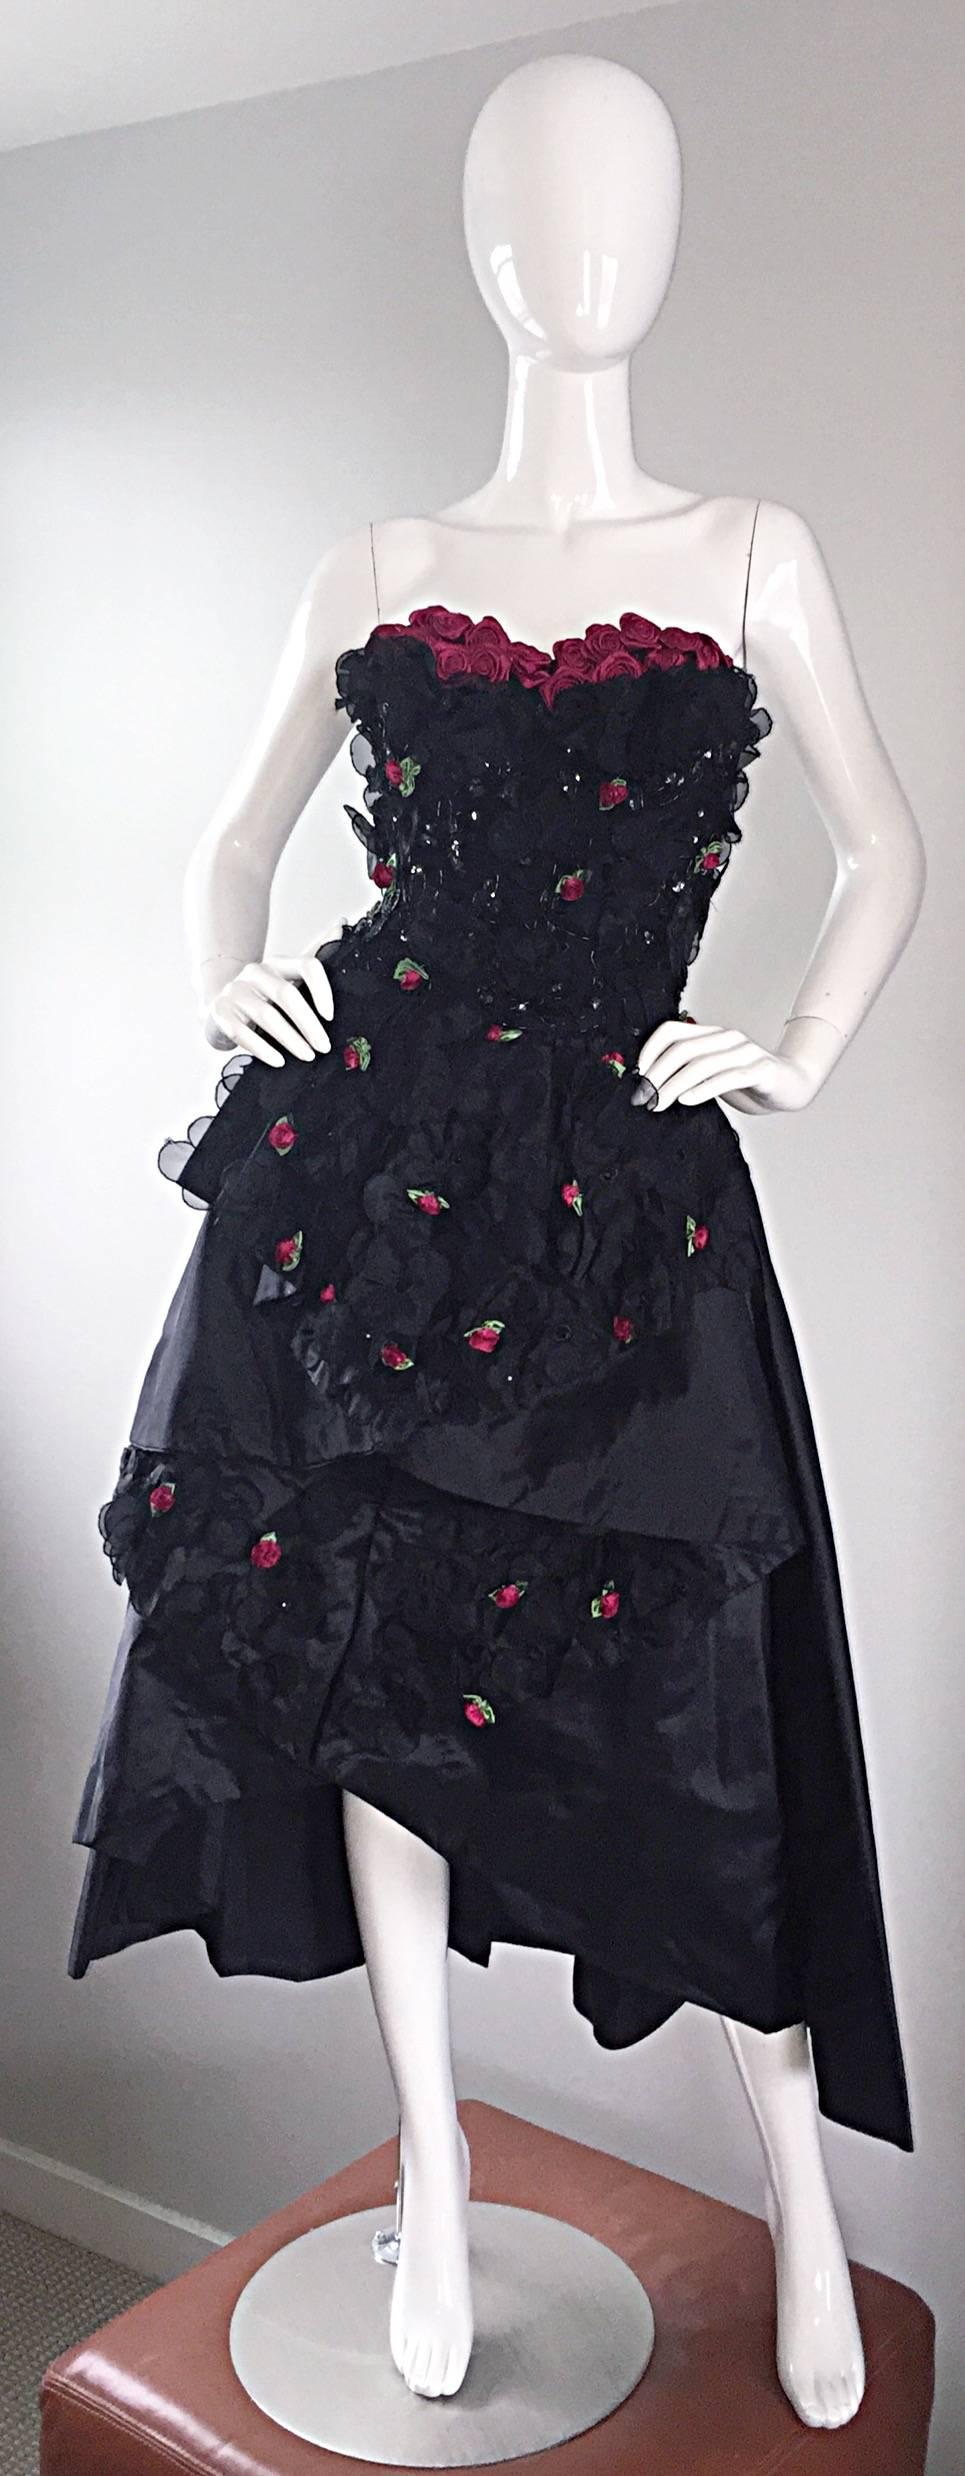 Exceptional 1950s Vintage Black Silk Taffeta Hi - Lo Dress w/ Rosettes and Lace For Sale 5